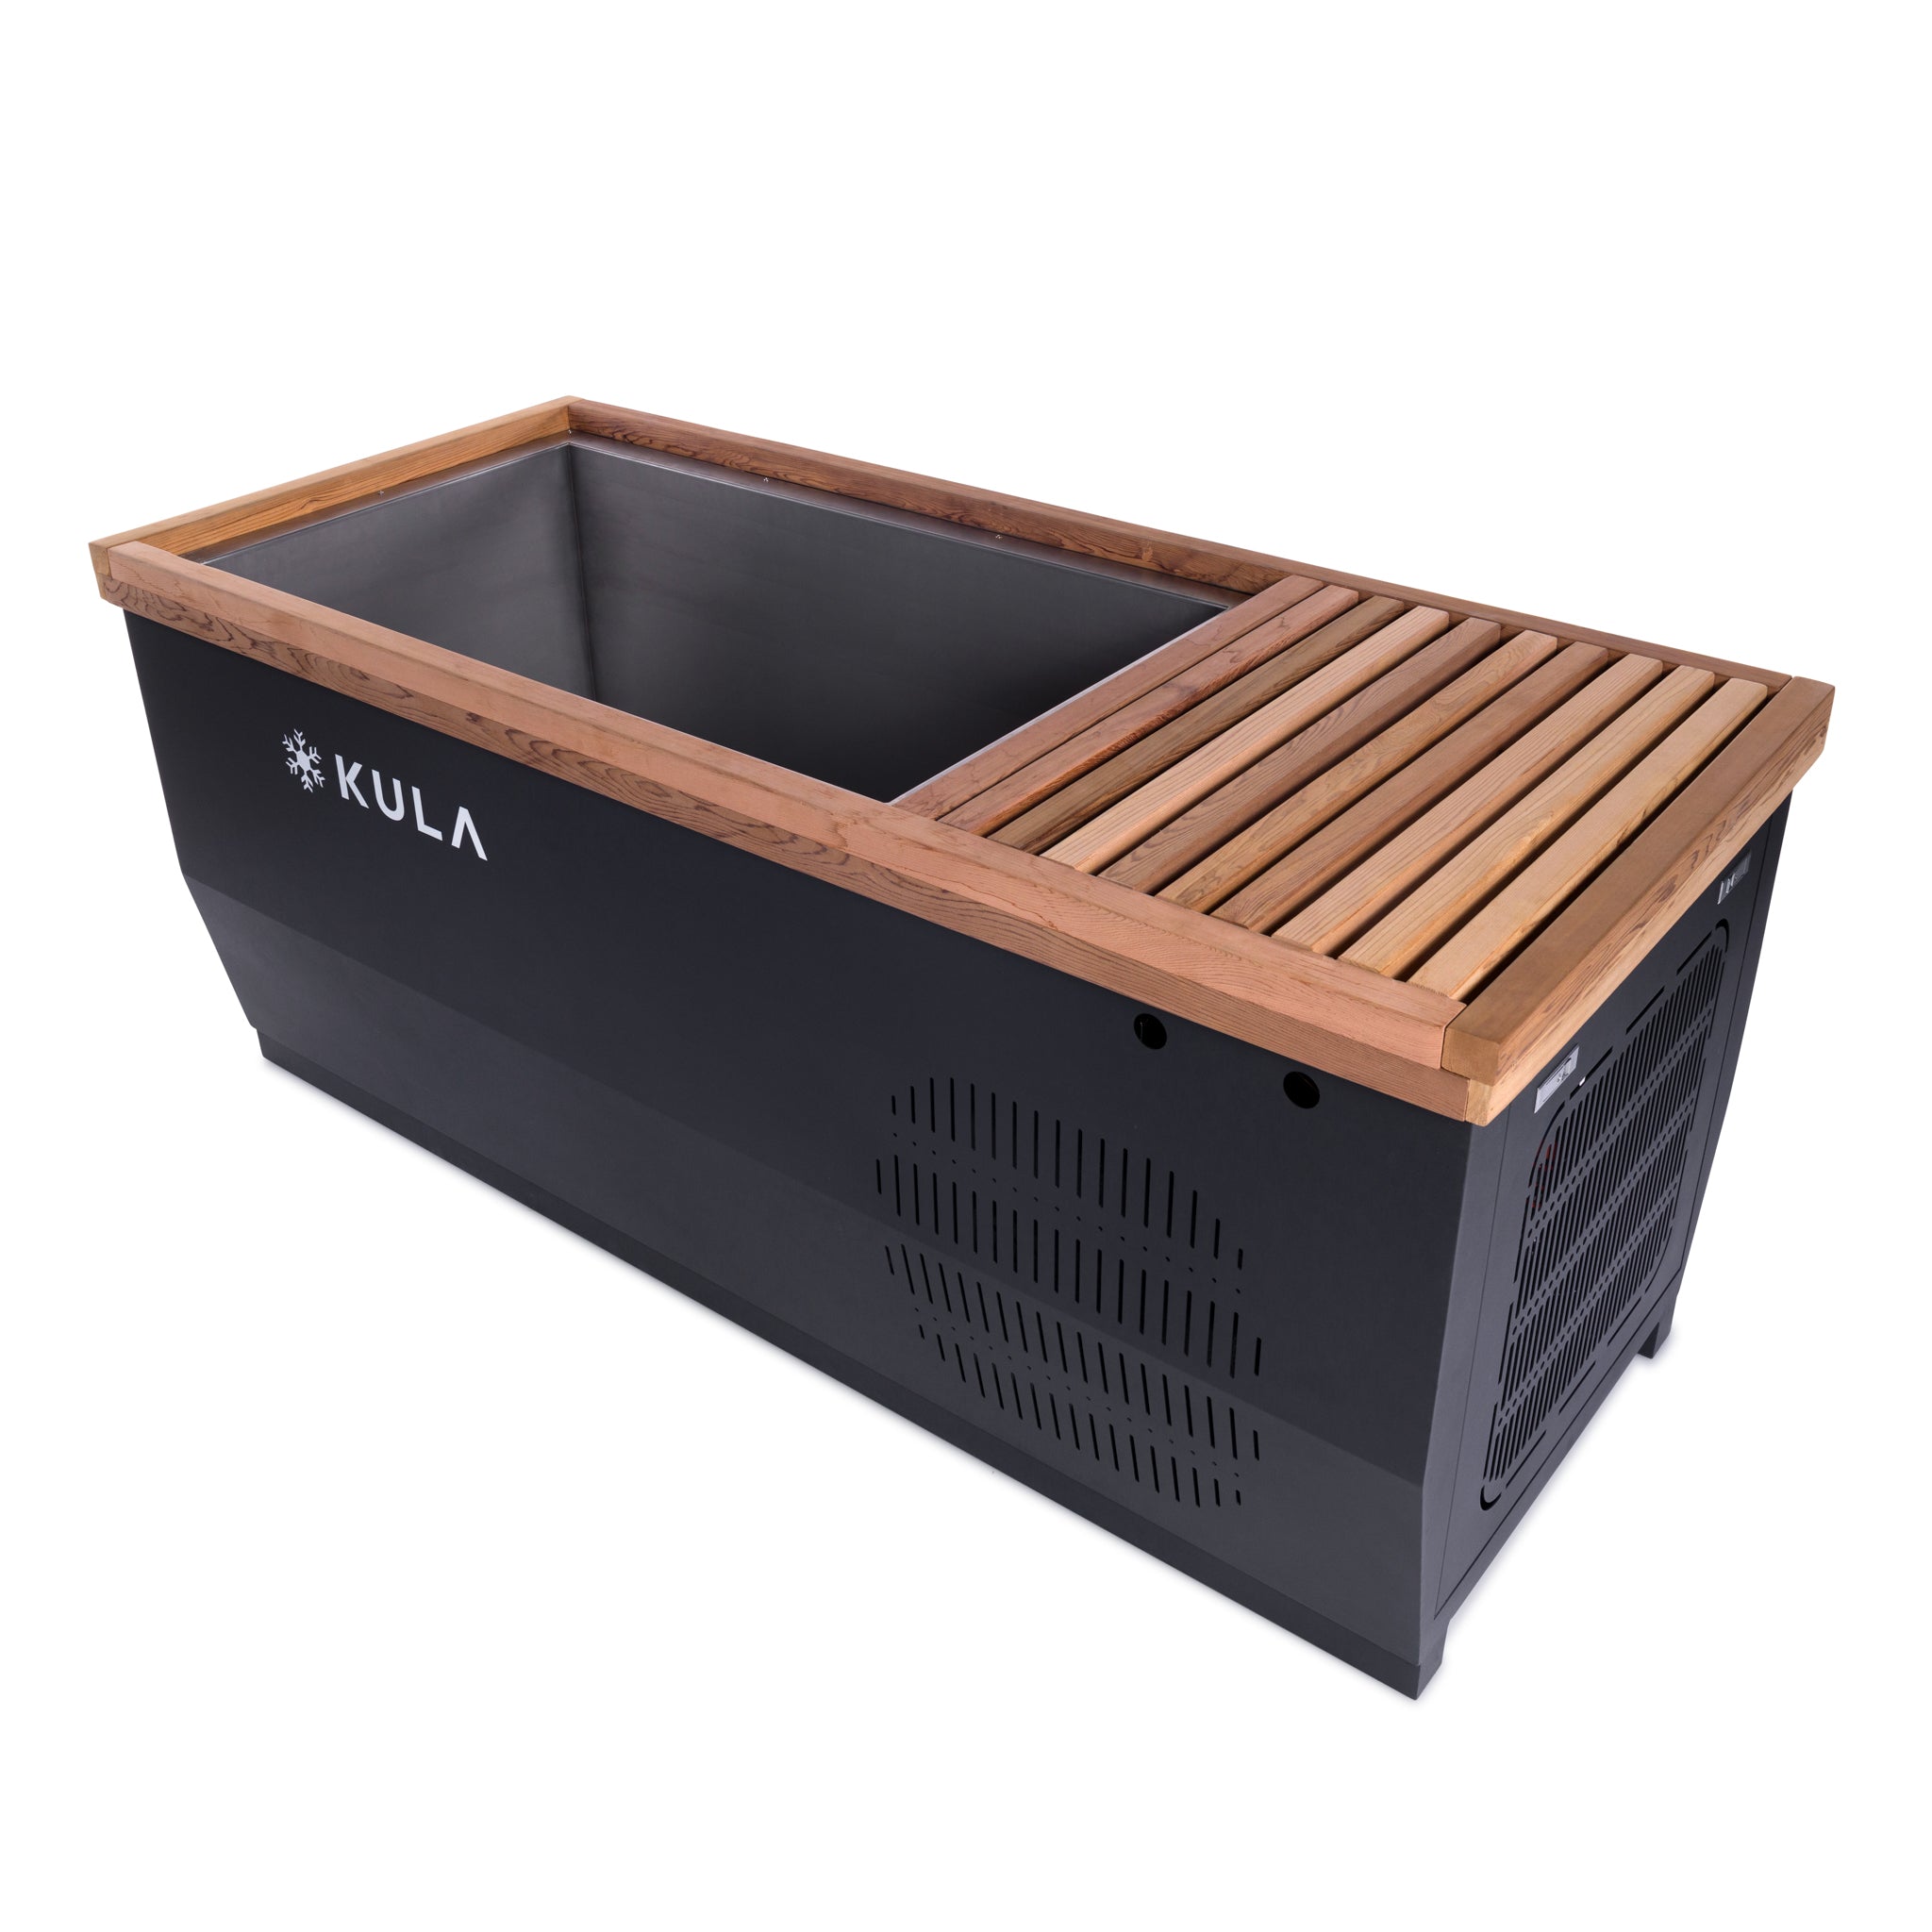 THE LUX TUB COLD PLUNGE